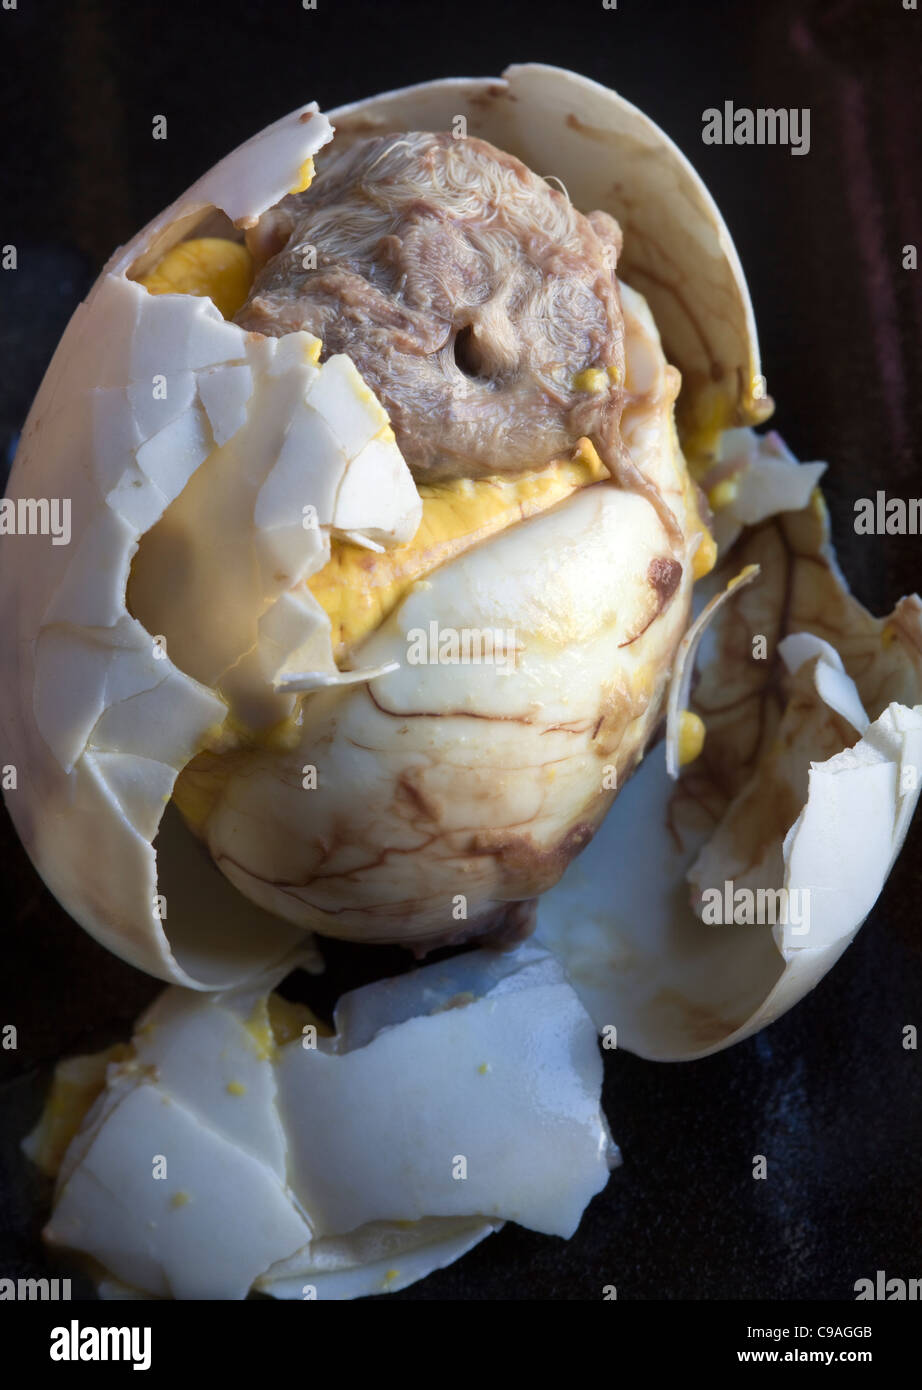 Balut Egg - an Asian street food delicacy - An example of the strange or weird food eaten by people around the world Stock Photo